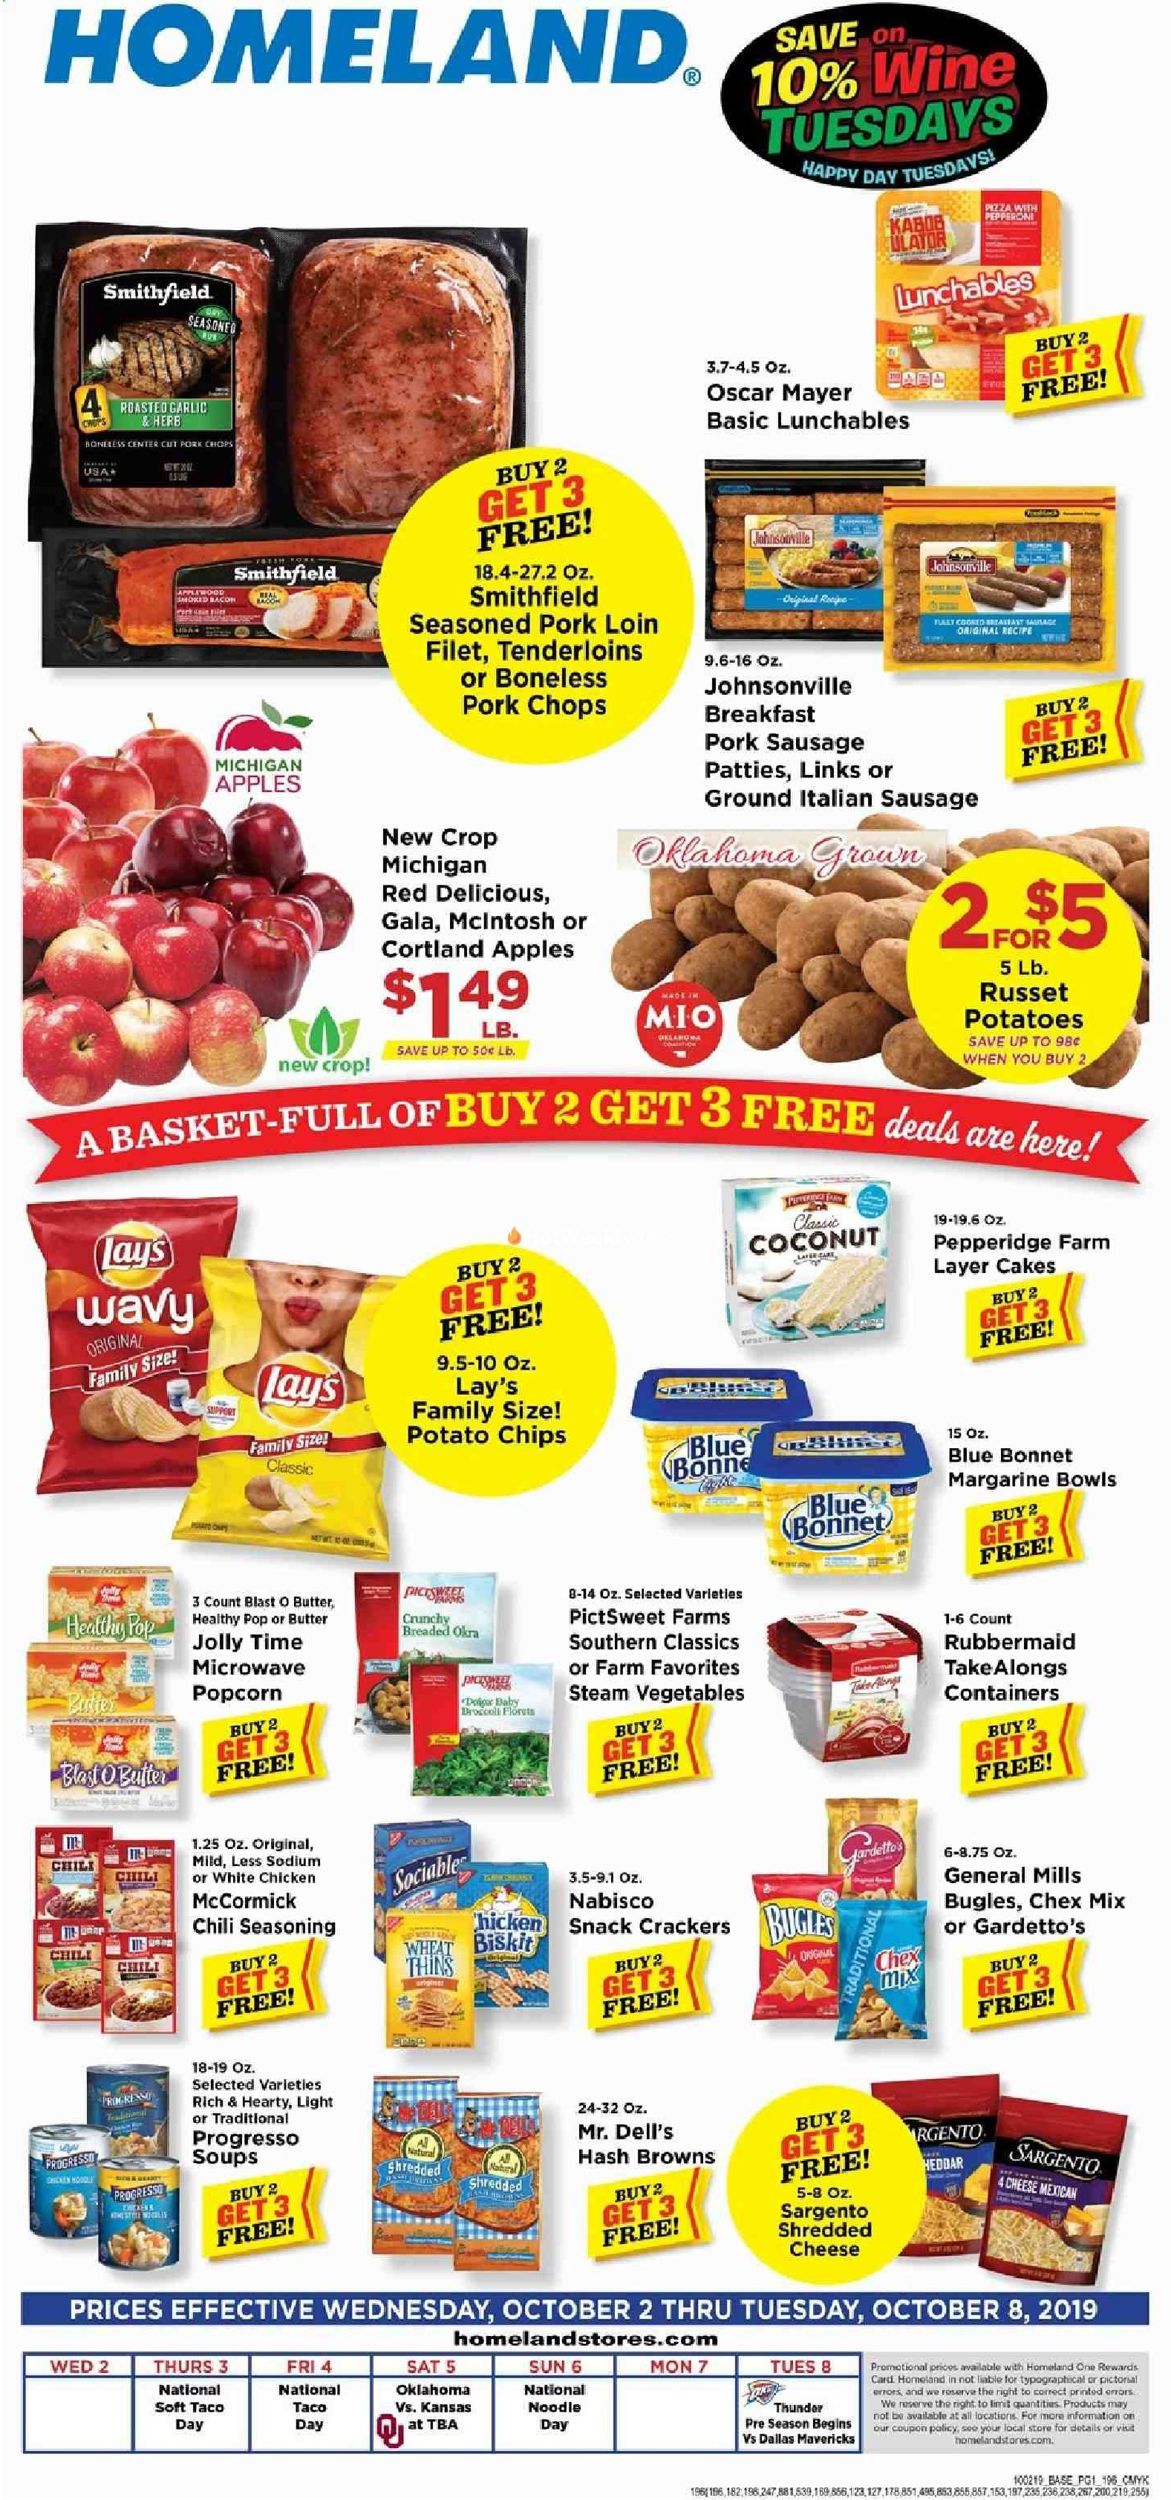 Homeland Current weekly ad 10/02 - 10/08/2019 - frequent-ads.com